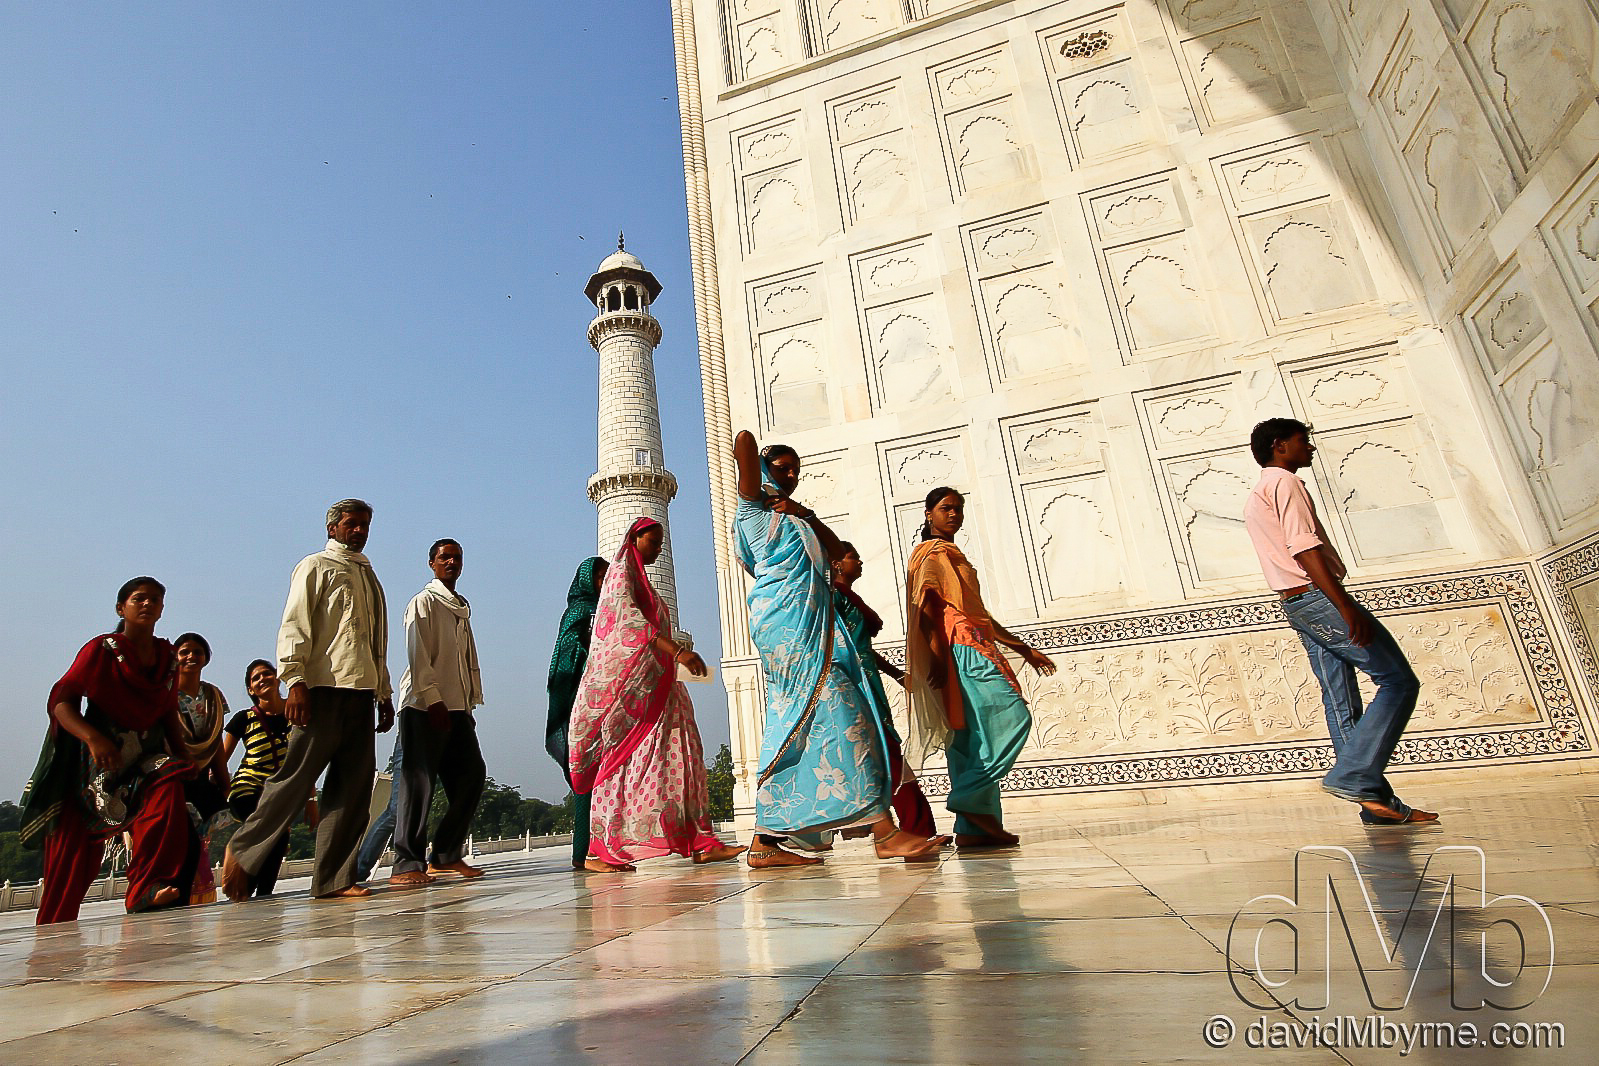 People Of India In Pictures Travel Blog Theplanetd